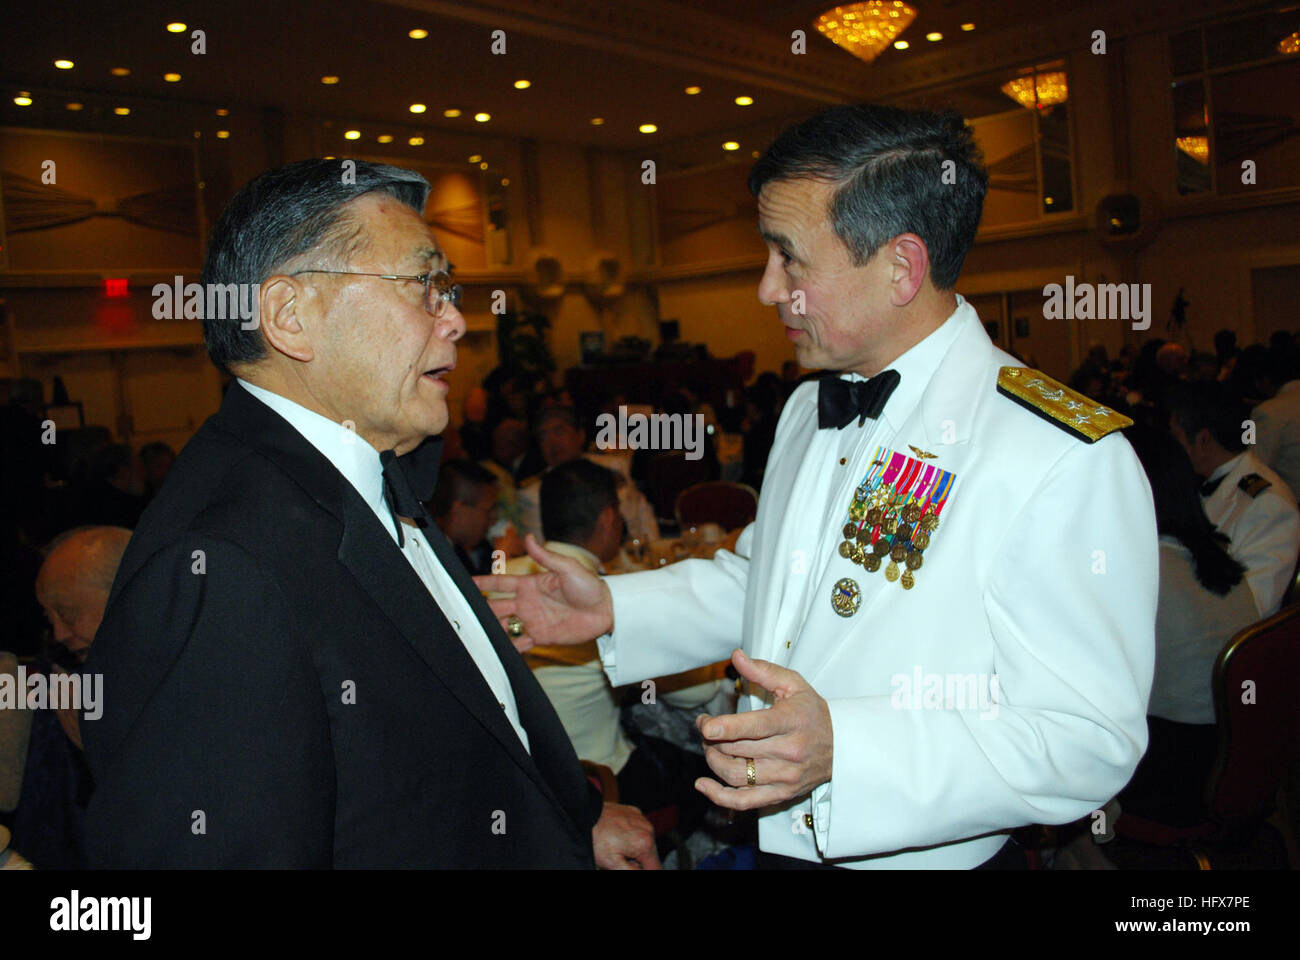 090417-N-9268E-068 WASHINGTON (April 17, 2009) Vice Adm. Harry B. Harris Jr., Deputy Chief of Naval Operations for Communication Networks, speaks with former Secretary of Transportation Norman Y. Mineta during the National Japanese-American Memorial Foundation annual awards gala. Harris is the highest-ranking Japanese-American naval officer and Mineta was the only Democrat to hold a cabinet position in the George W. Bush presidential administration. (U.S. Navy photo by Lt. Karen Eifert/Released) US Navy 090417-N-9268E-068 Vice Adm. Harry B. Harris Jr., Deputy Chief of Naval Operations for Comm Stock Photo